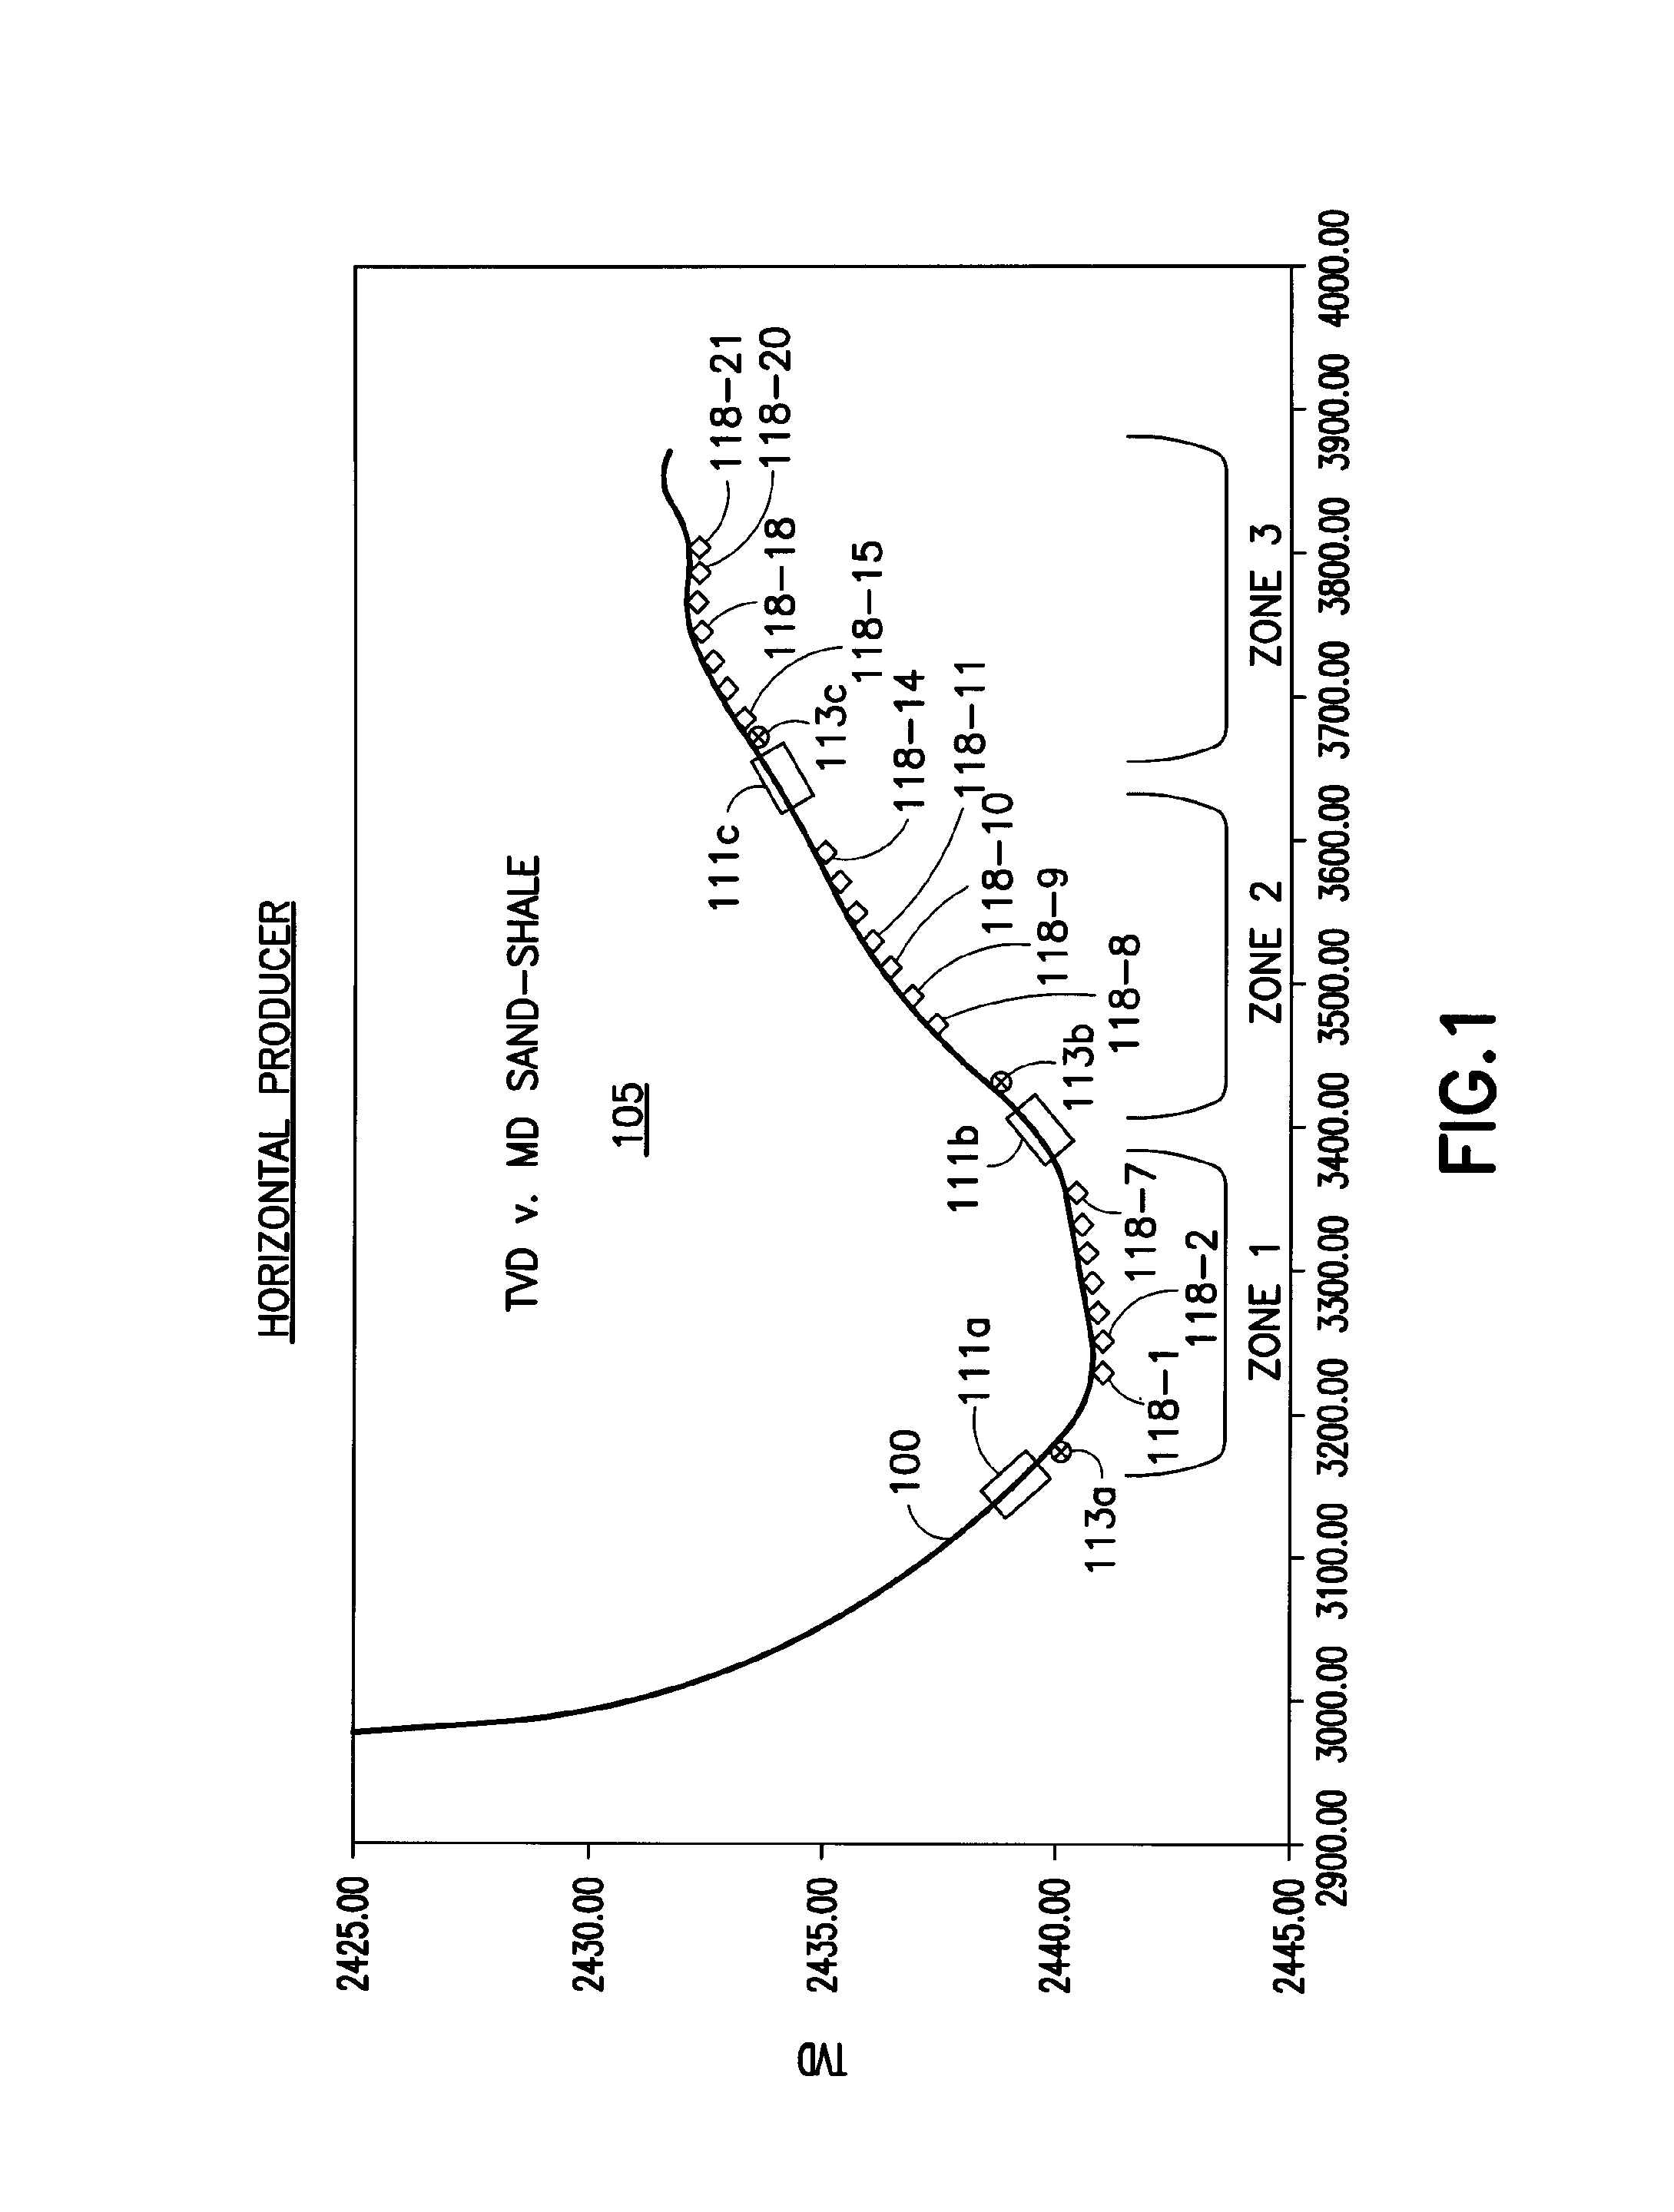 Apparatus for measuring streaming potentials and determining earth formation characteristics